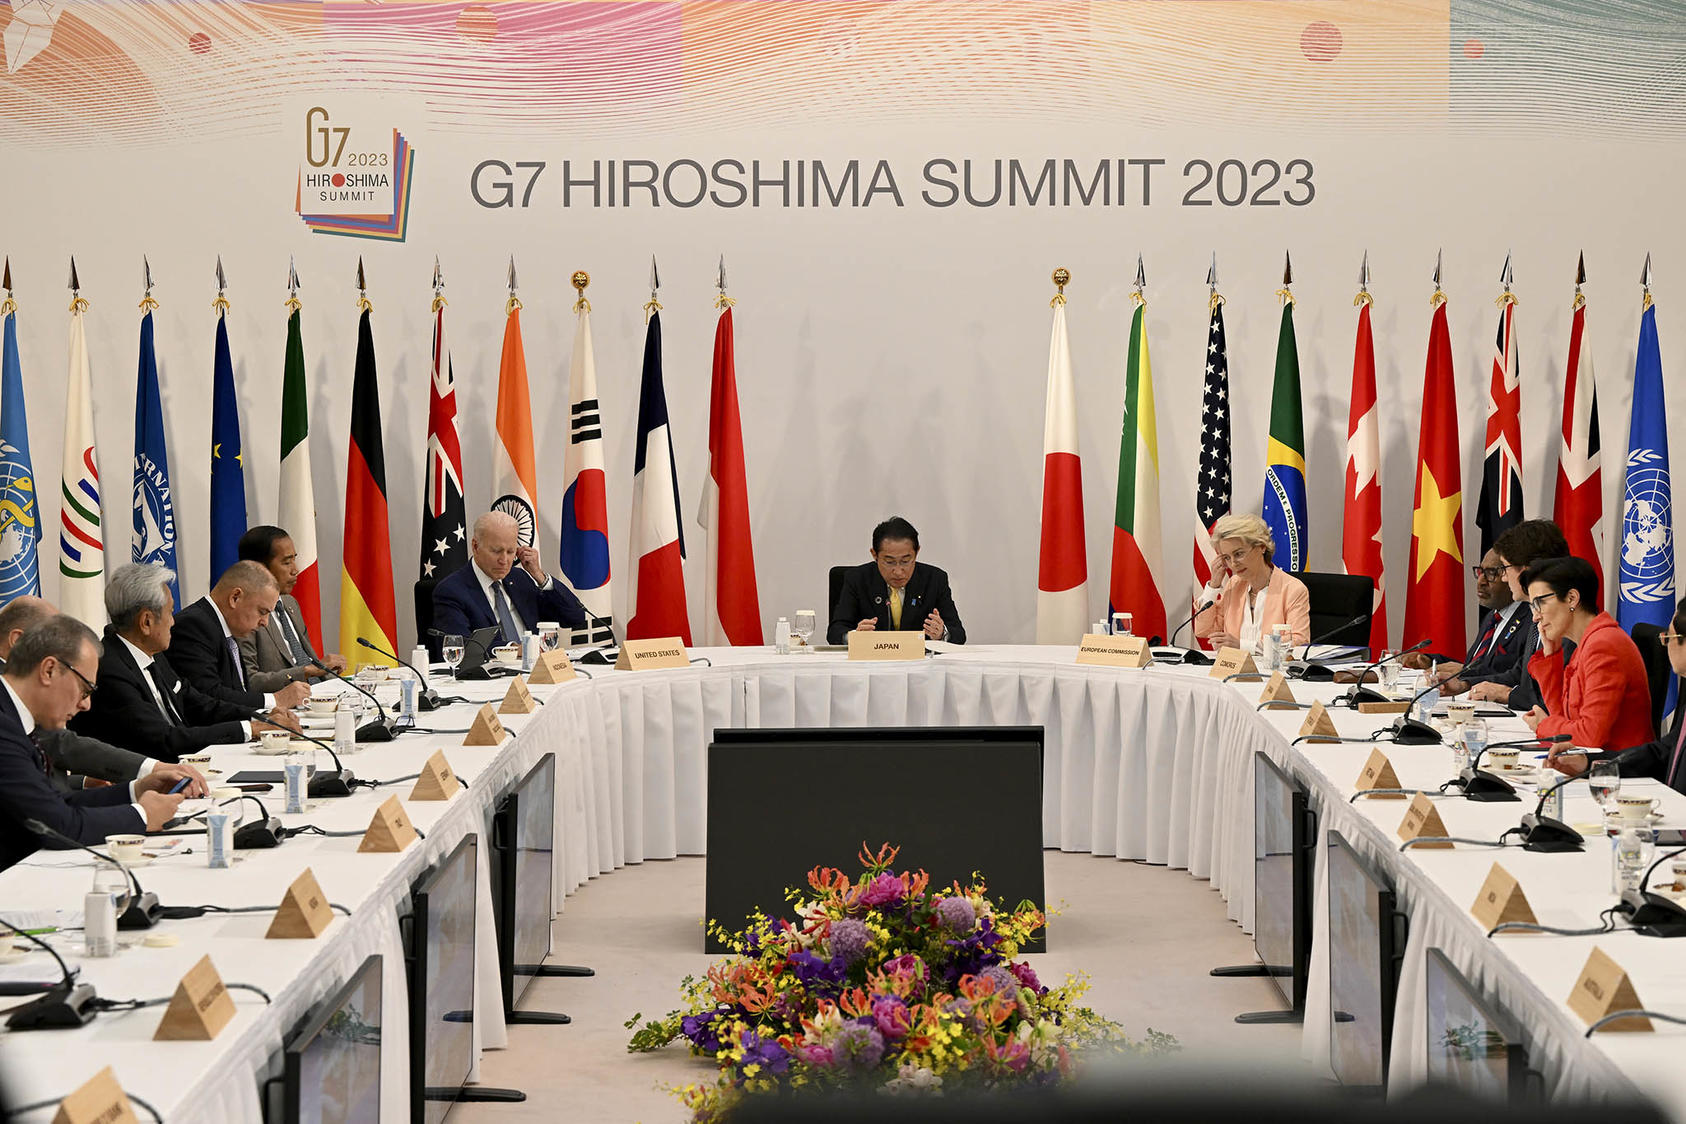 U.S. President Joe Biden, center left, participates in a Partnership for Global Infrastructure and Investment meeting with other world leaders at the G7 Summit, in Hiroshima, Japan on May 20, 2023. (Kenny Holston/The New York Times)